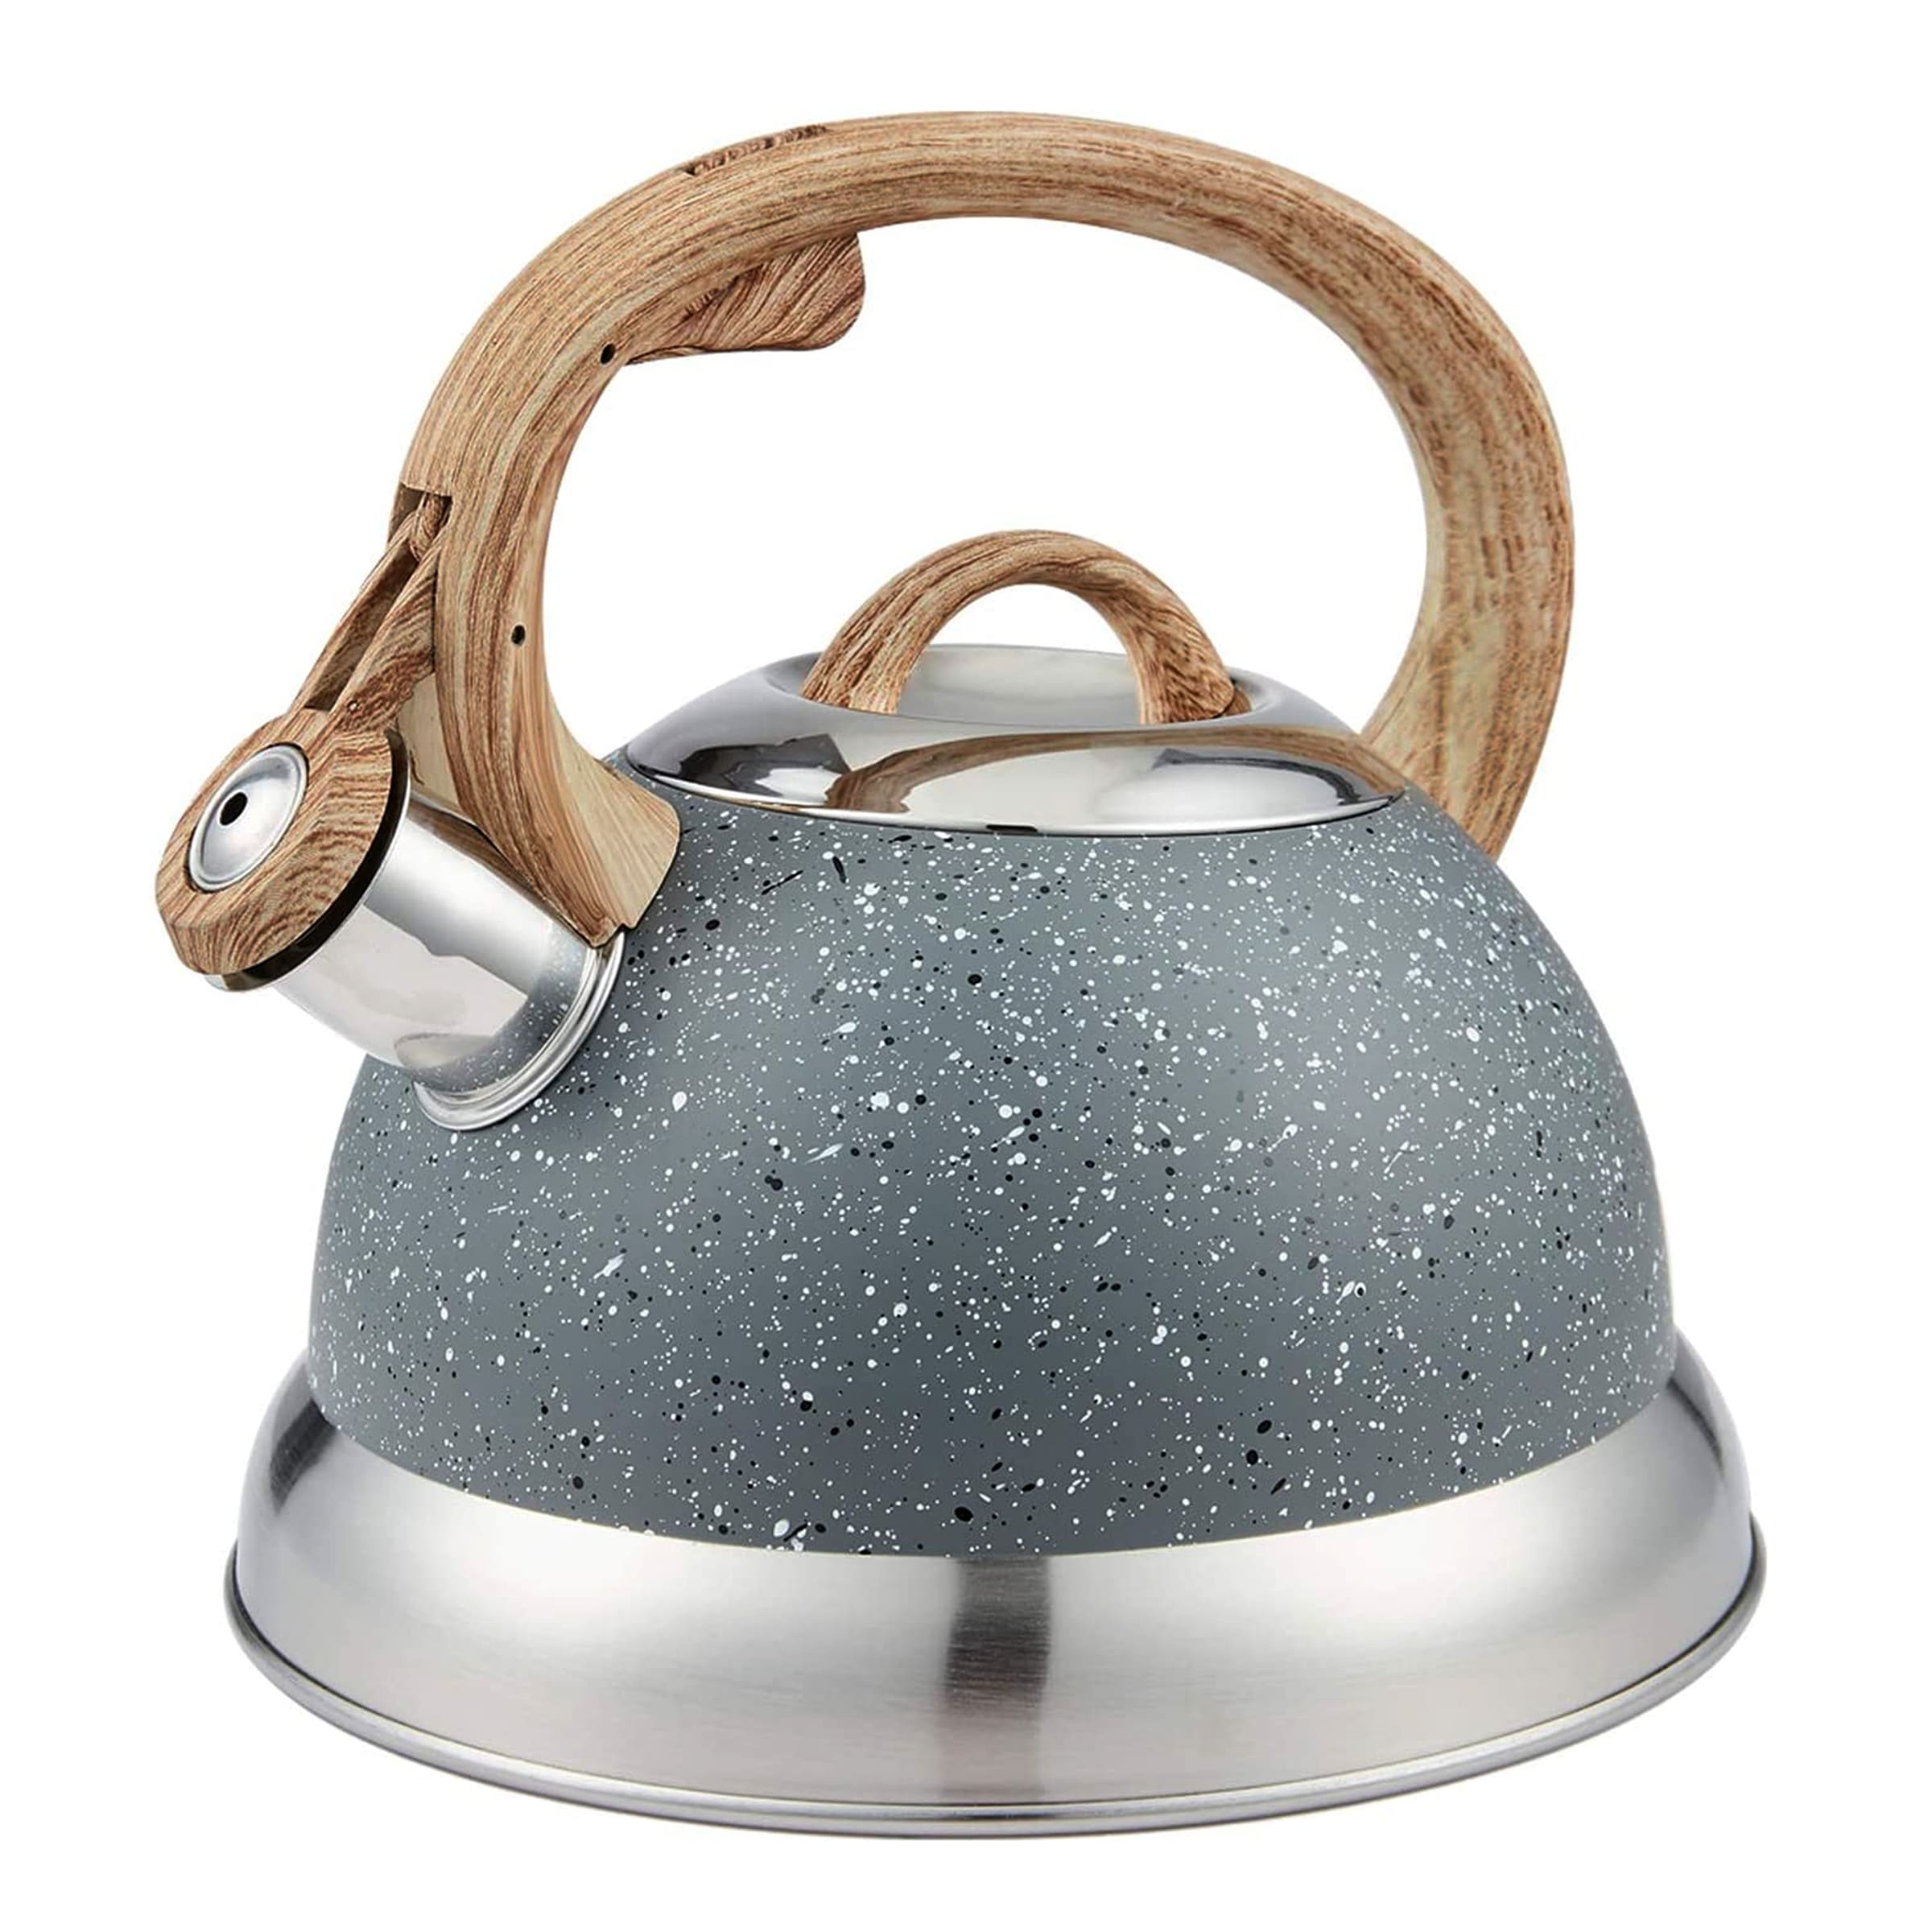 https://ak1.ostkcdn.com/images/products/is/images/direct/19c490b698aa6723548ff3f83b316336ceb21bae/Creative-Home-2.3-Qt.-Stainless-Steel-Whistling-Tea-Kettle-with-Ergonomic-Wood-Rubber-Touching-Handle%2C-Opaque-Gray-with-Speckle.jpg